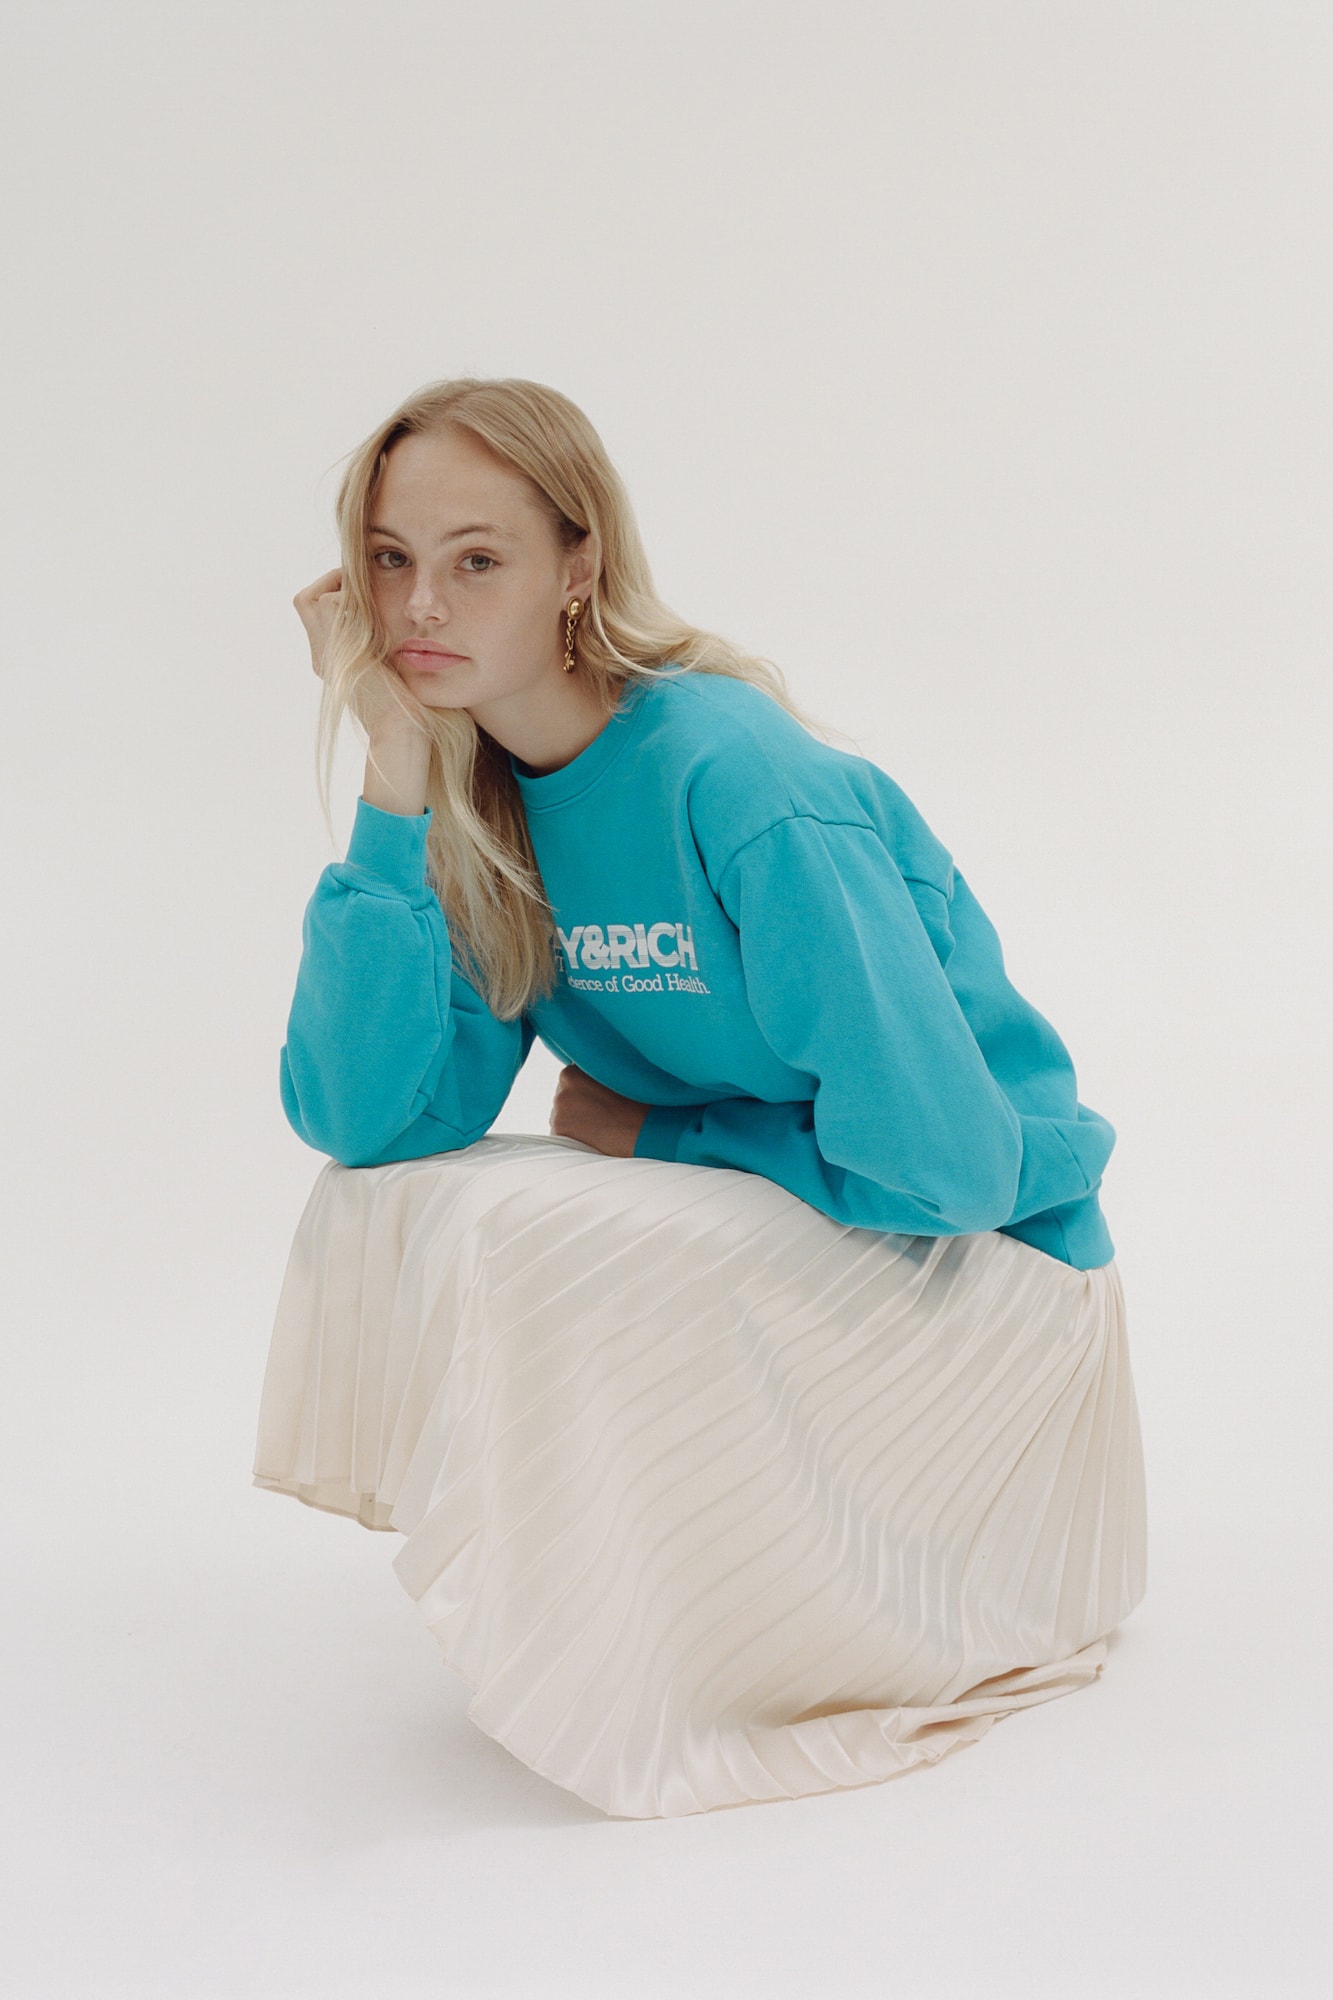 Sporty & Rich Fall/Winter 19 Collection Lookbook Emily Oberg Hoodies Print Sneakers T-Shirt Retro Inspired Fashion